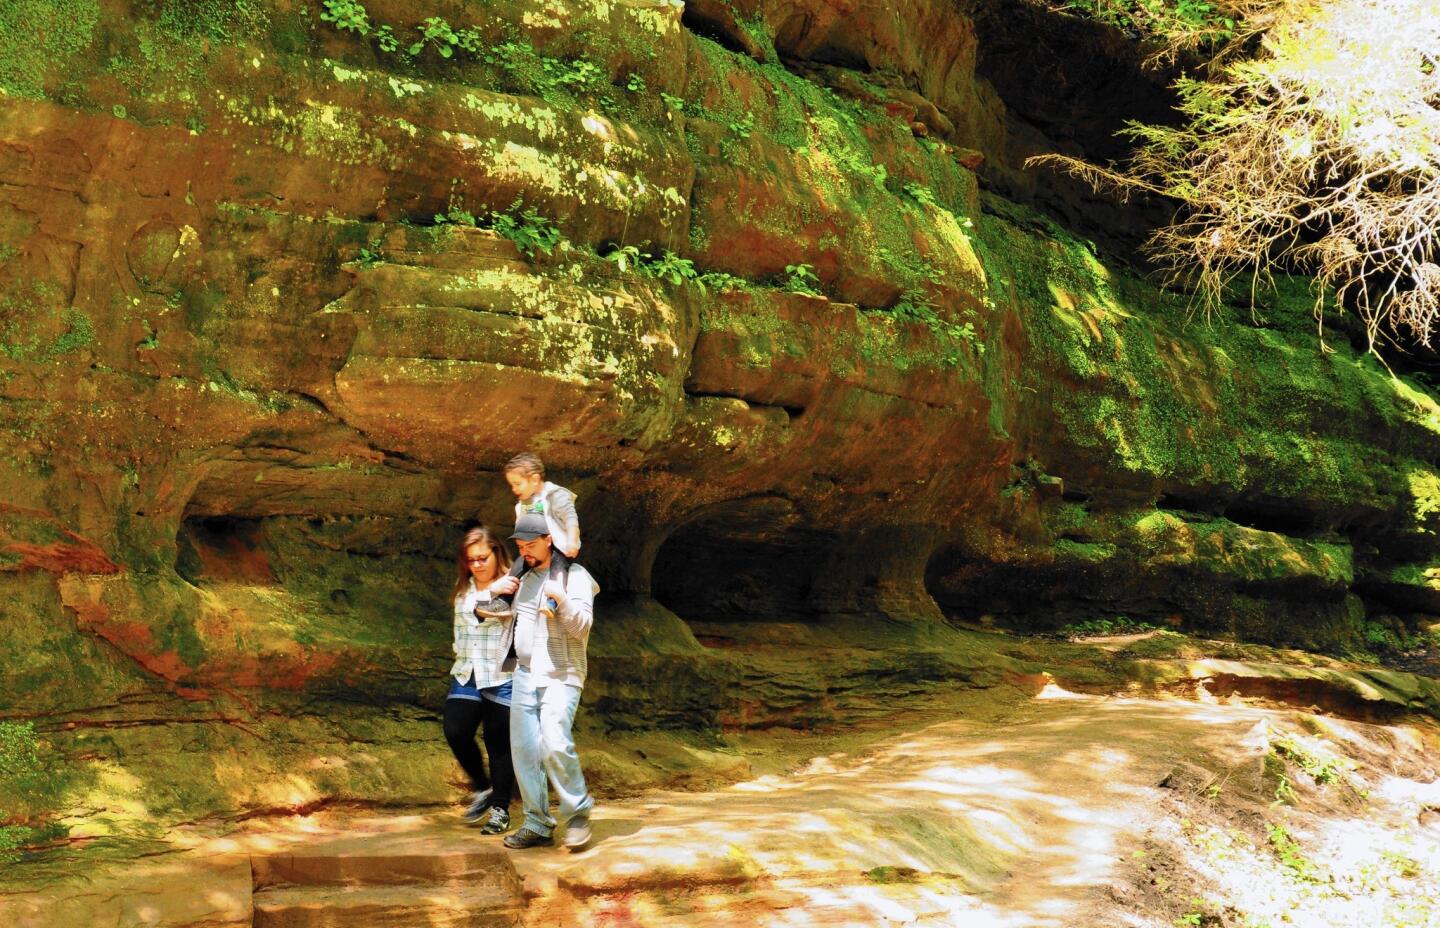 Hocking Hills State Park is Ohio’s most-visited park. Free admission and parking make it especially attractive to families on a budget.